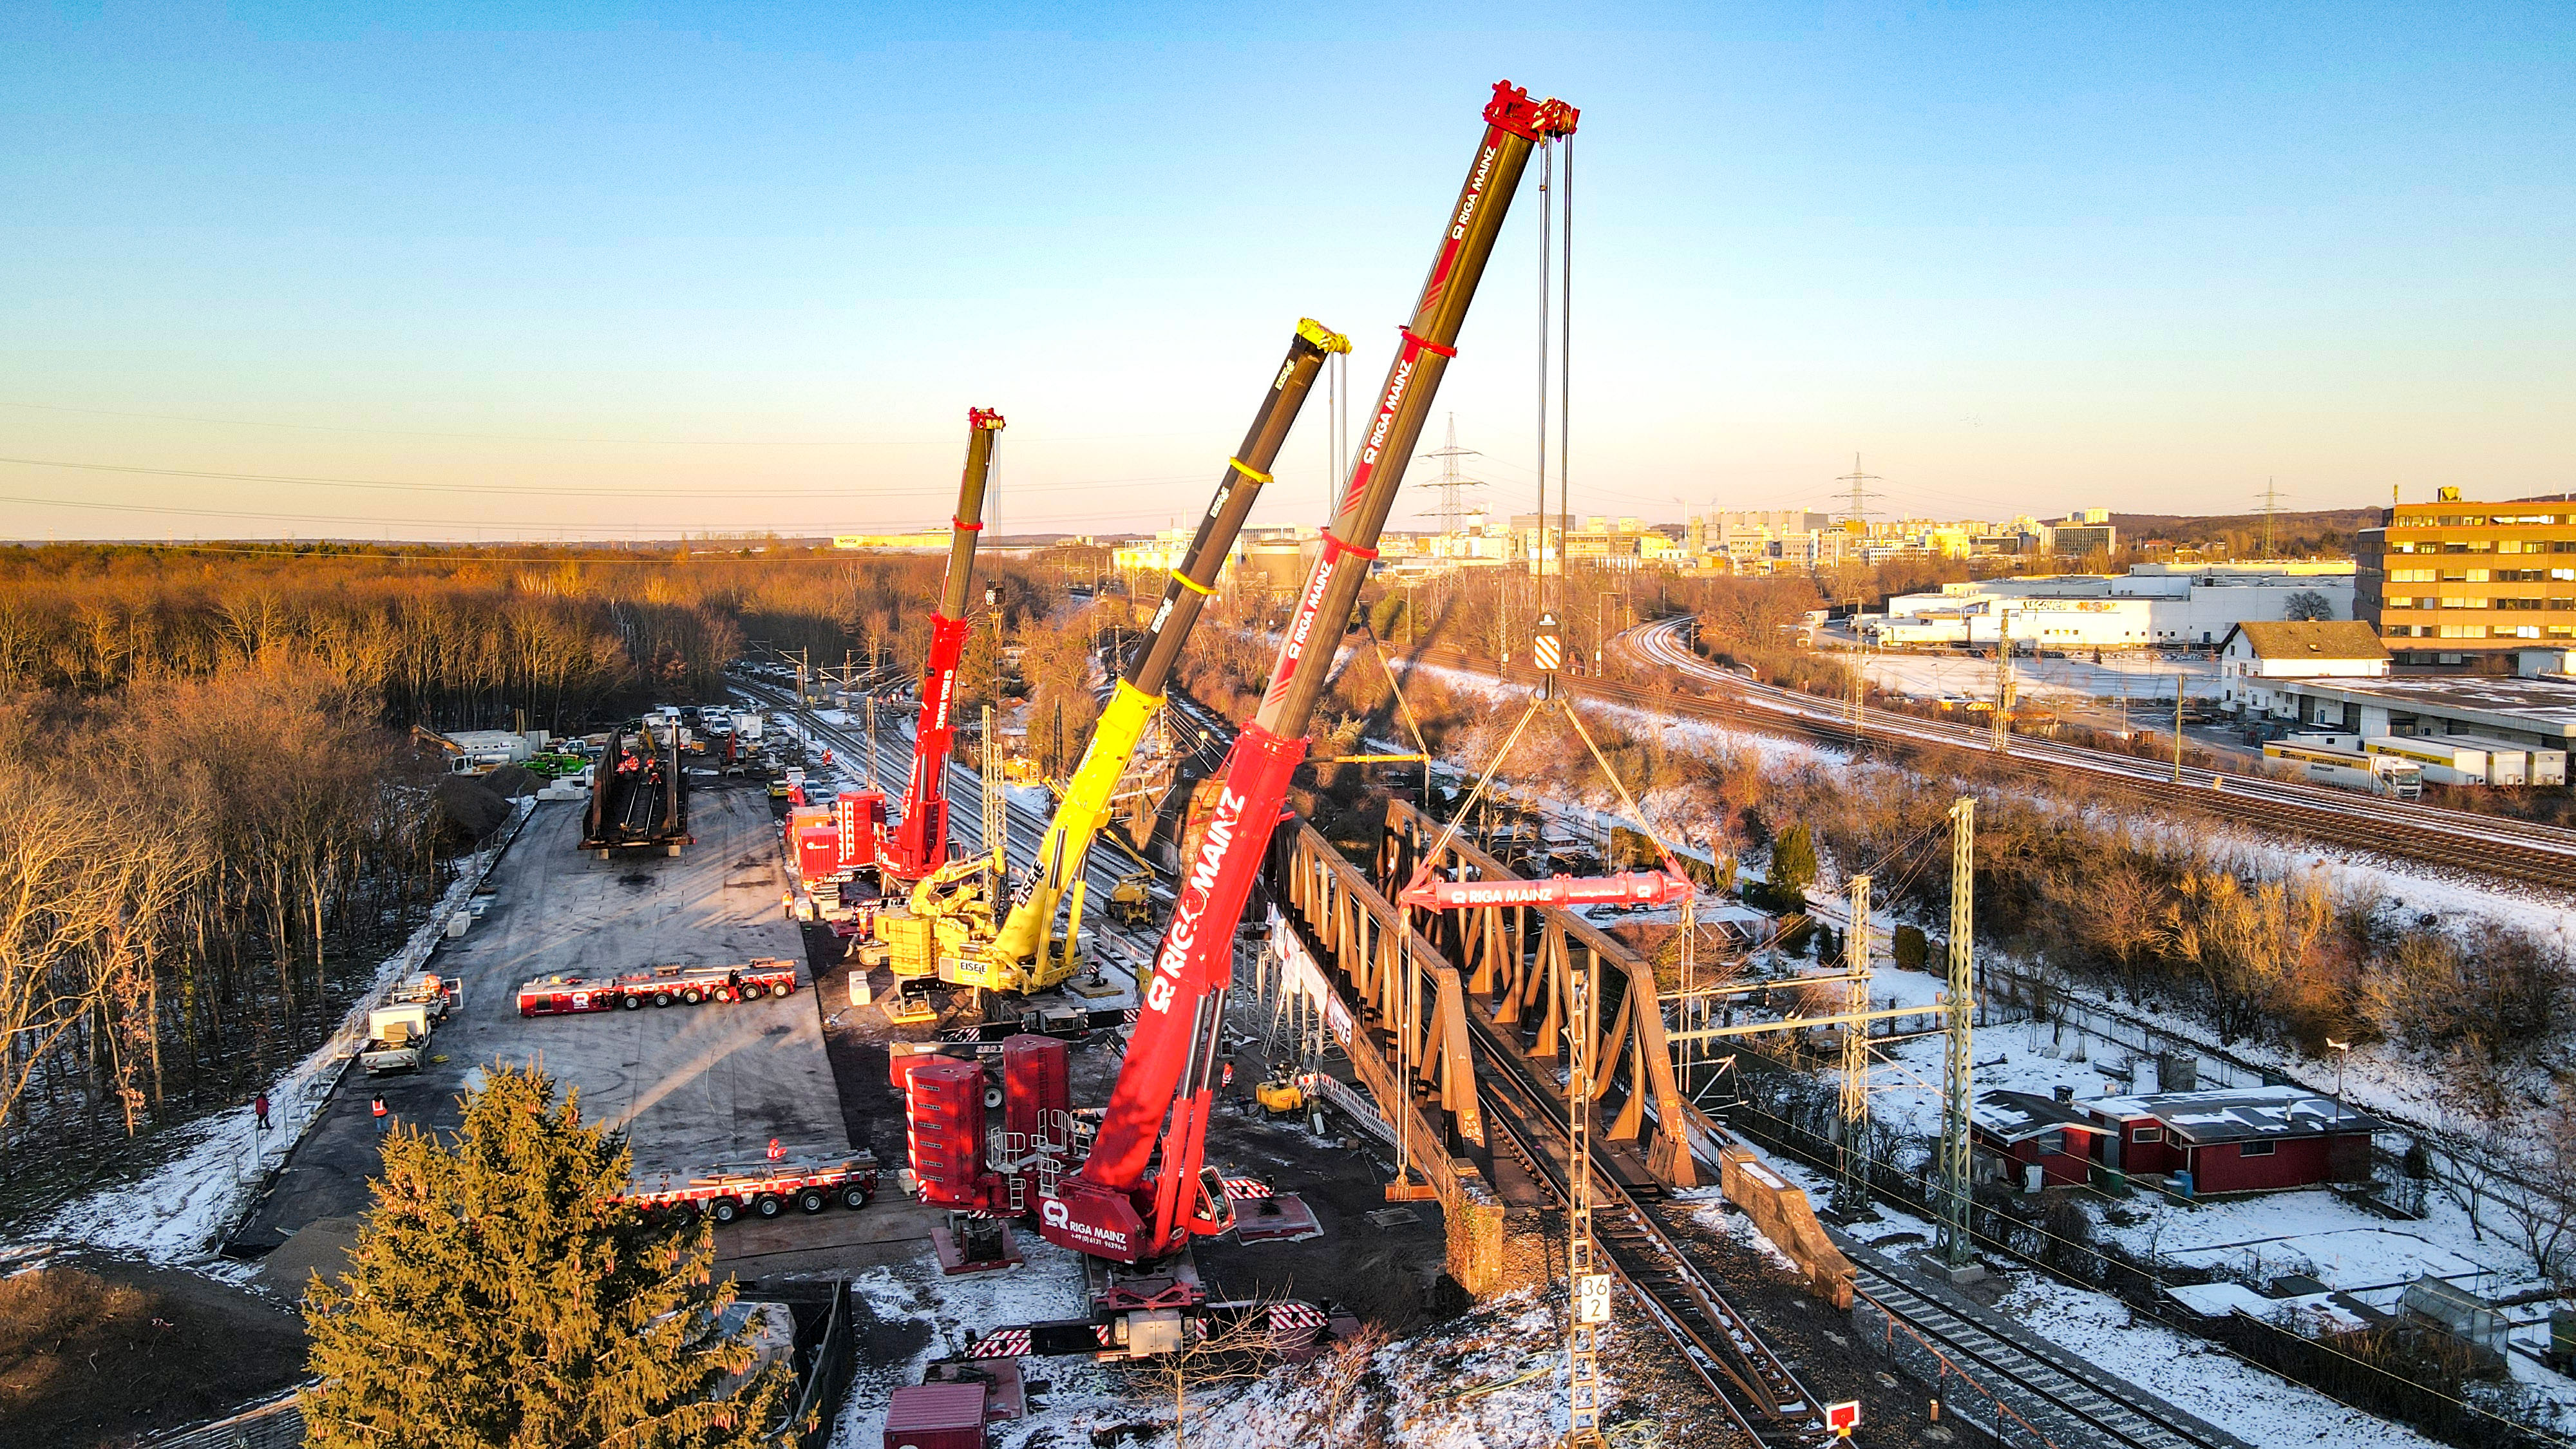 Bridge number 2 – Riga’s LTM 1450-8.1 in tandem with Eisele’s LTM 1500.8.1 remove the same weight at a slightly lower radius.